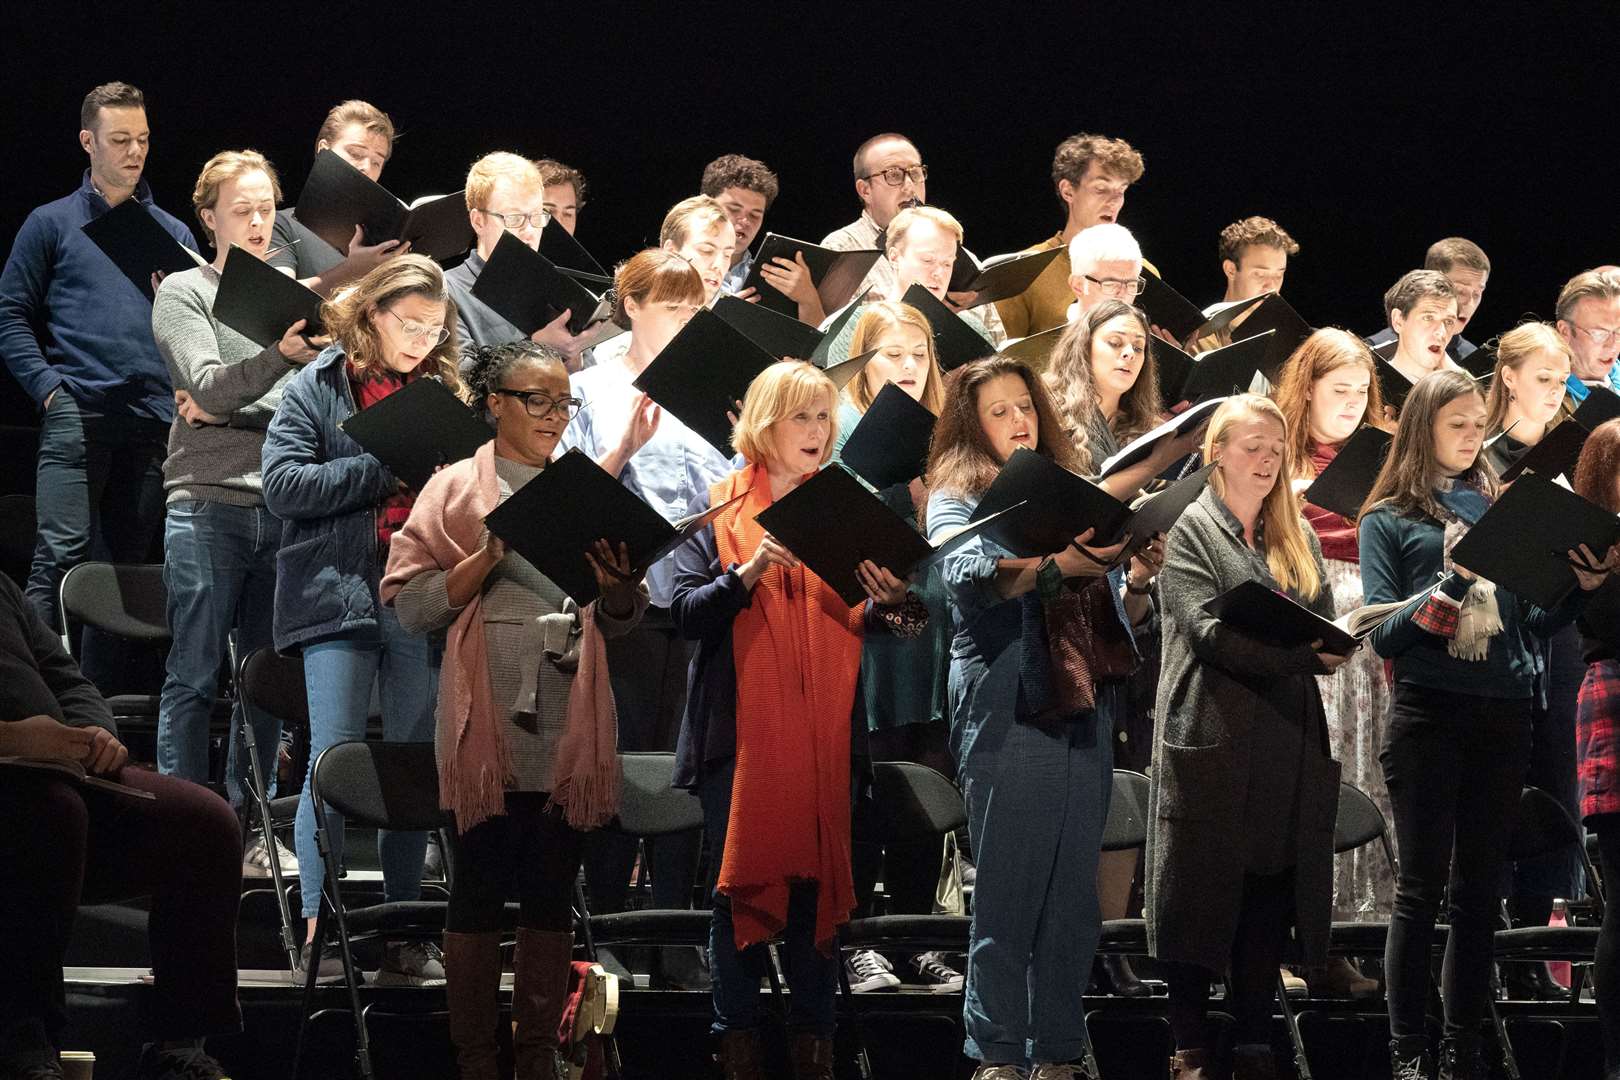 The Glyndebourne Chorus will be part of the musical concert performing Mozart’s Requiem. Picture: Richard Hubert Smith